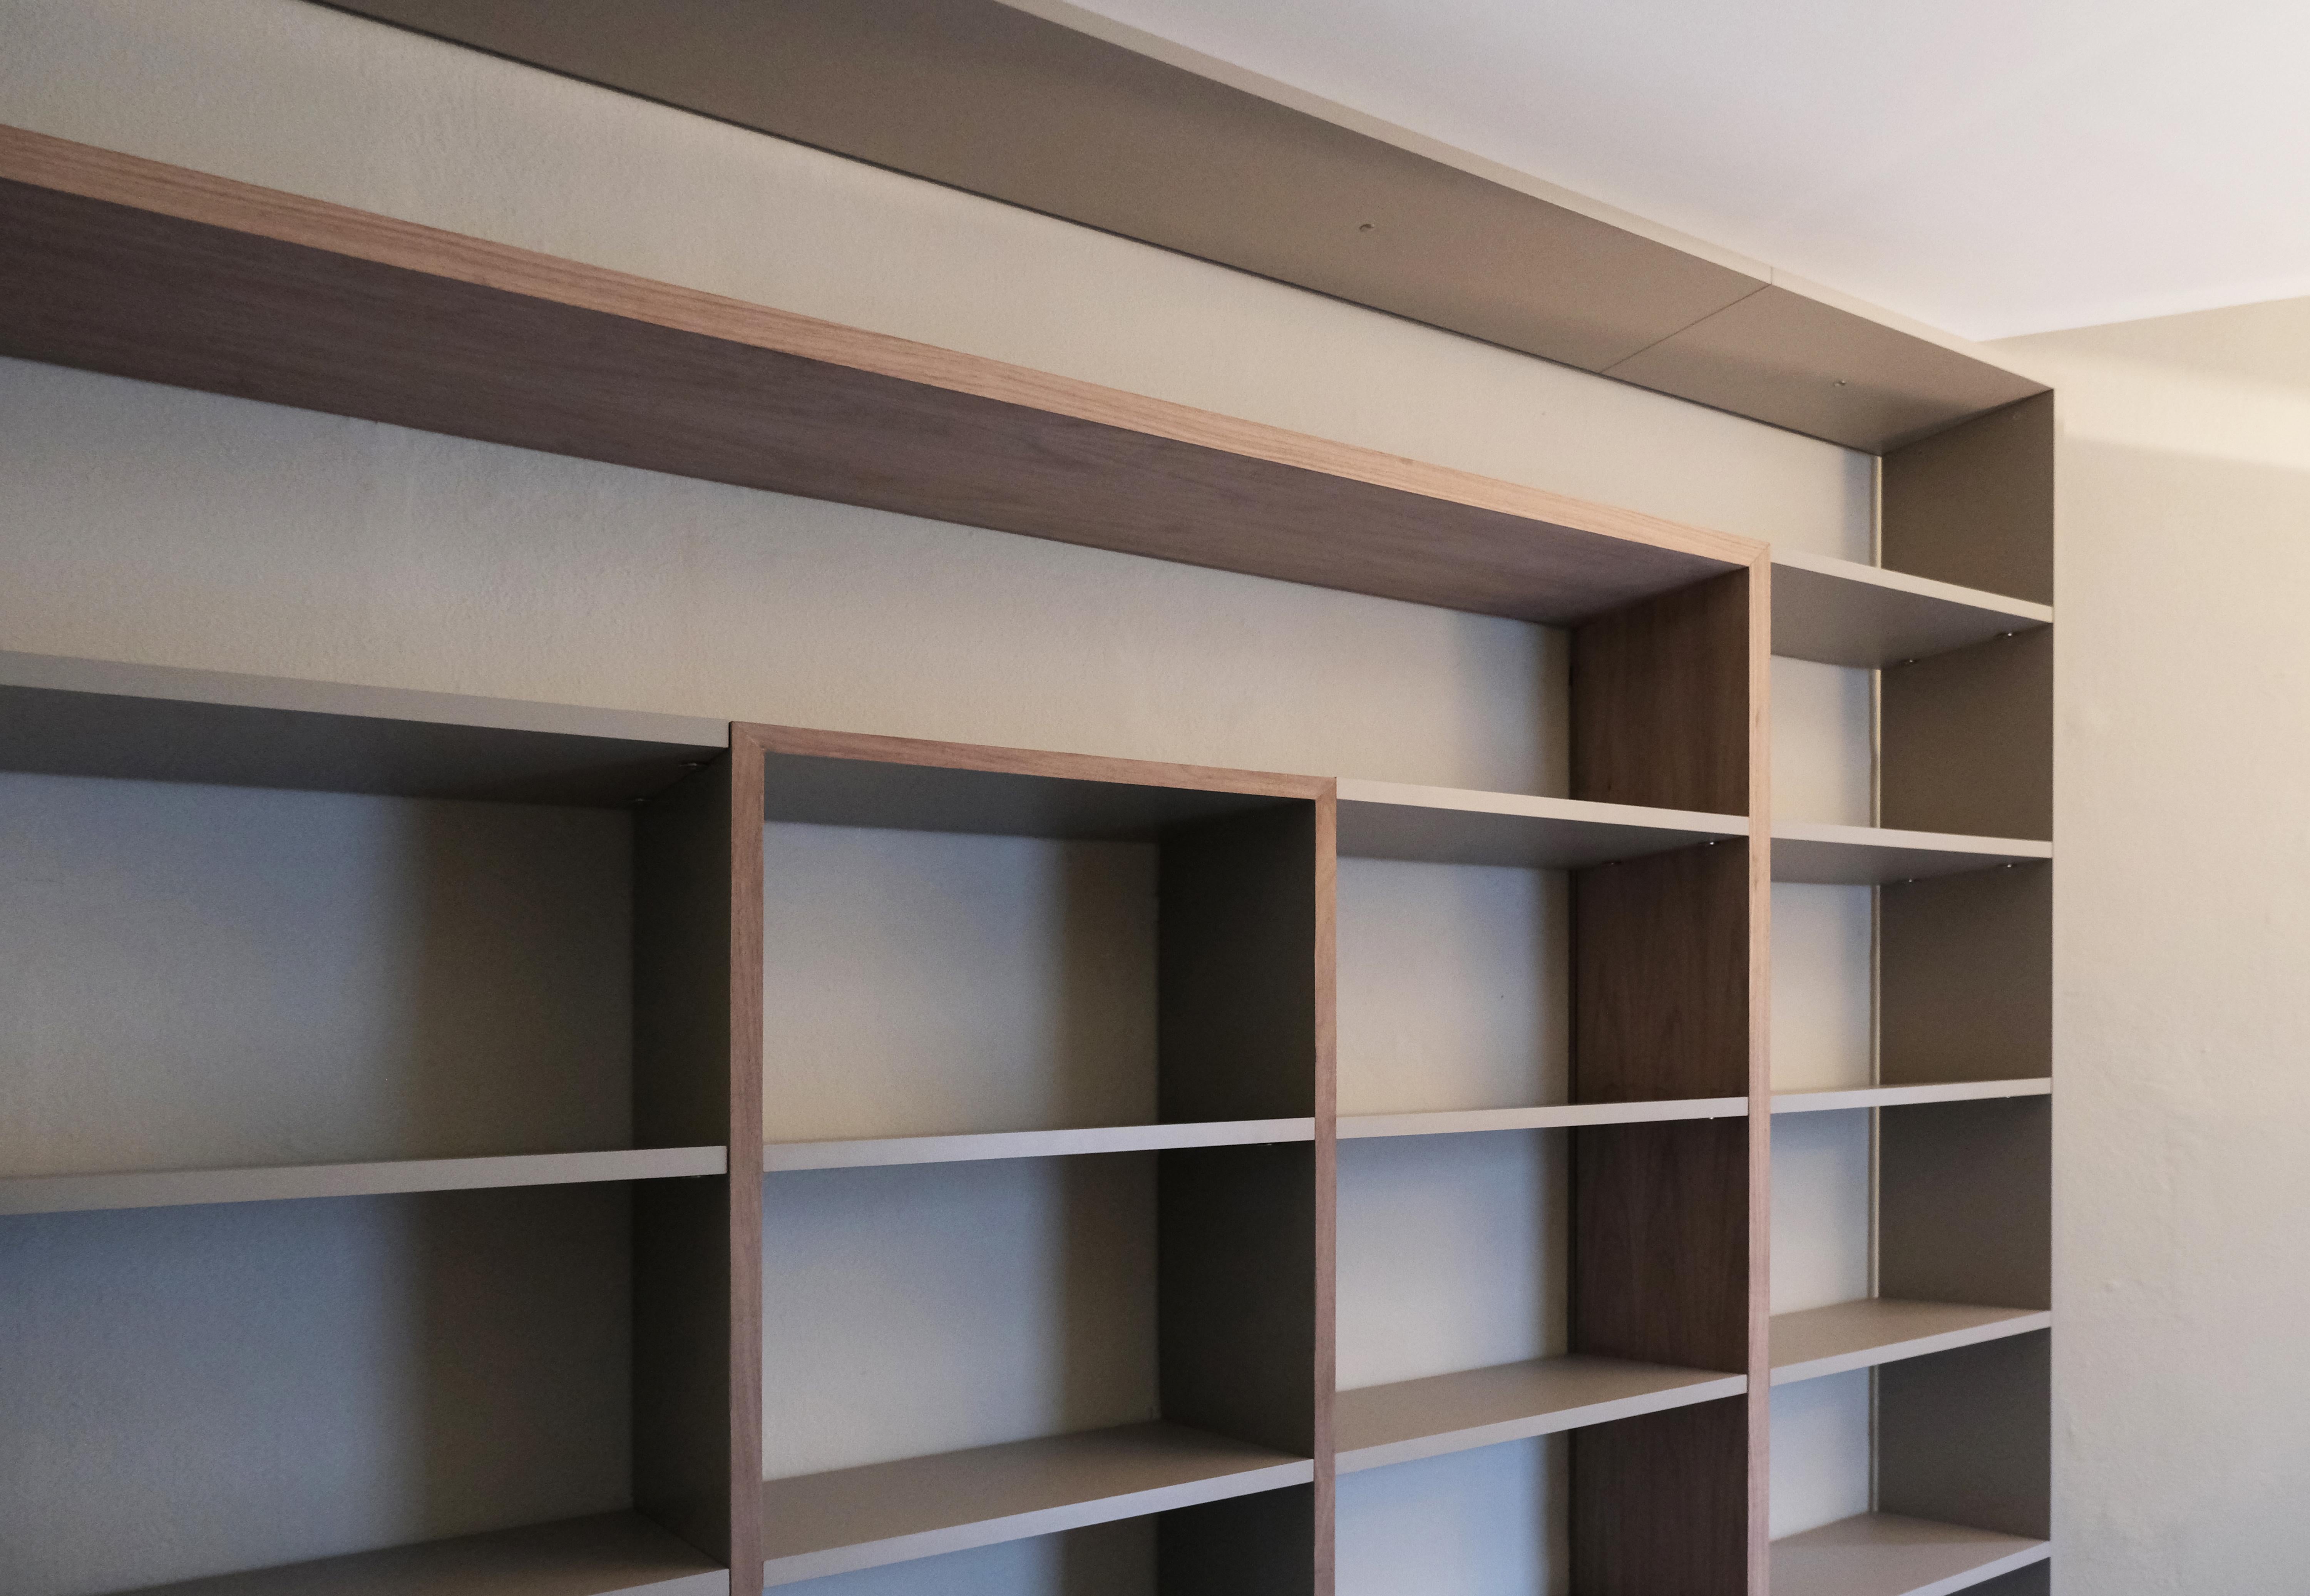 'Frame' bookcase designed by the artist Raoul Gilioli is built by excellent Italian artisans. The large suspended frame of the precious Italian walnut wood 'Canaletto' gives the bookcase a warm and natural look in contrast with the shelves in grey